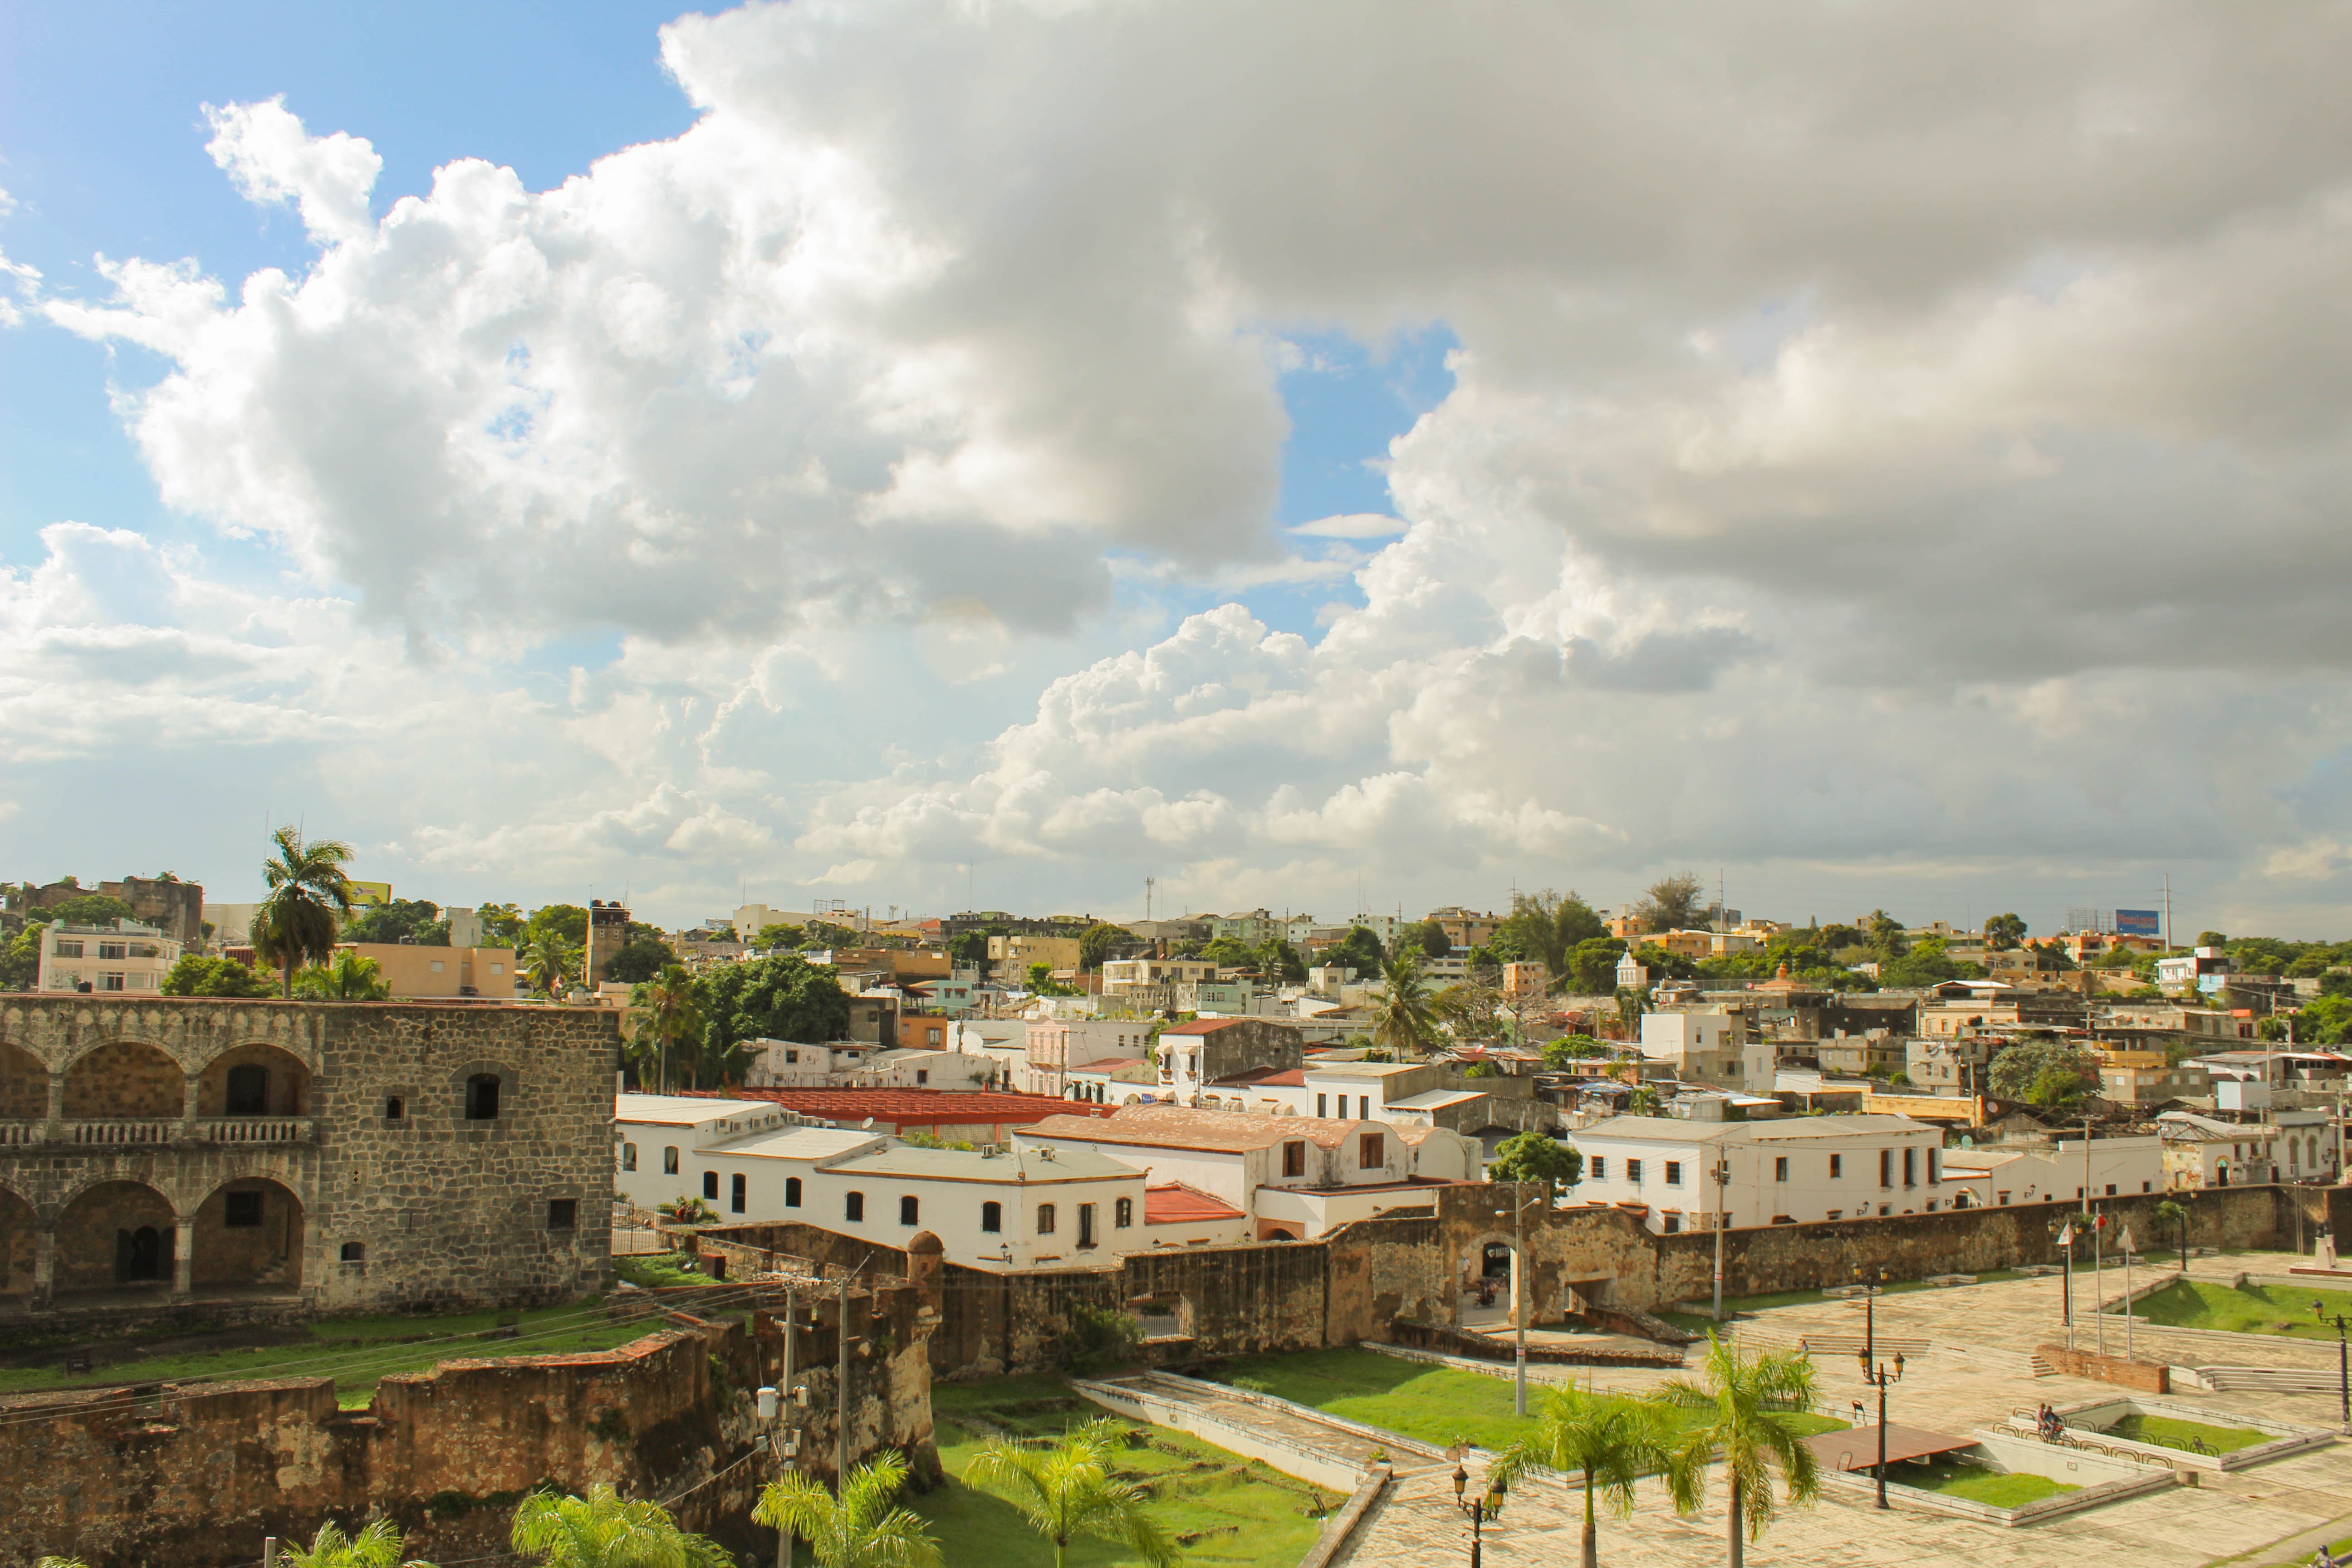 The first city of the Americas, Santo Domingo in the Dominican Republic